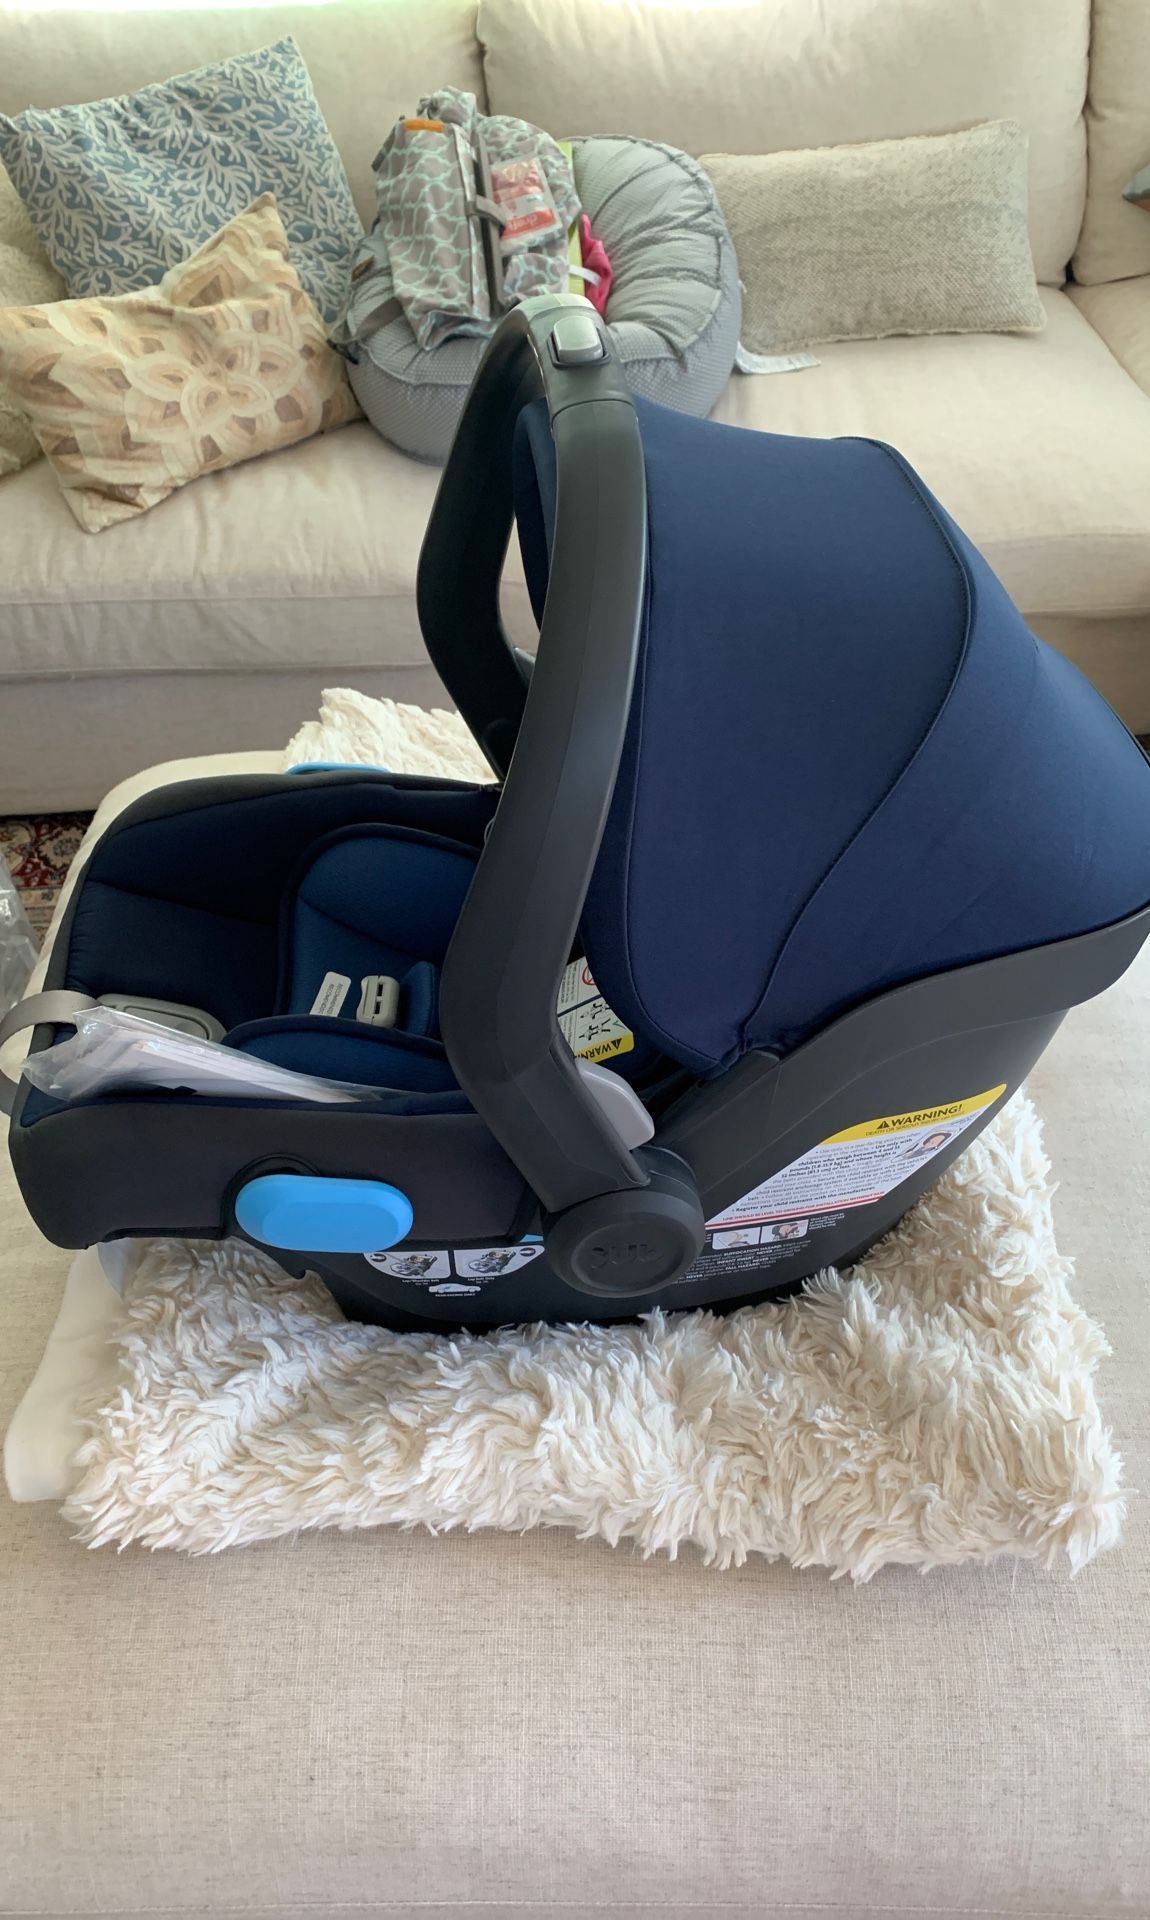 COMPLETELY NEW UPPAbaby Mesa car seat